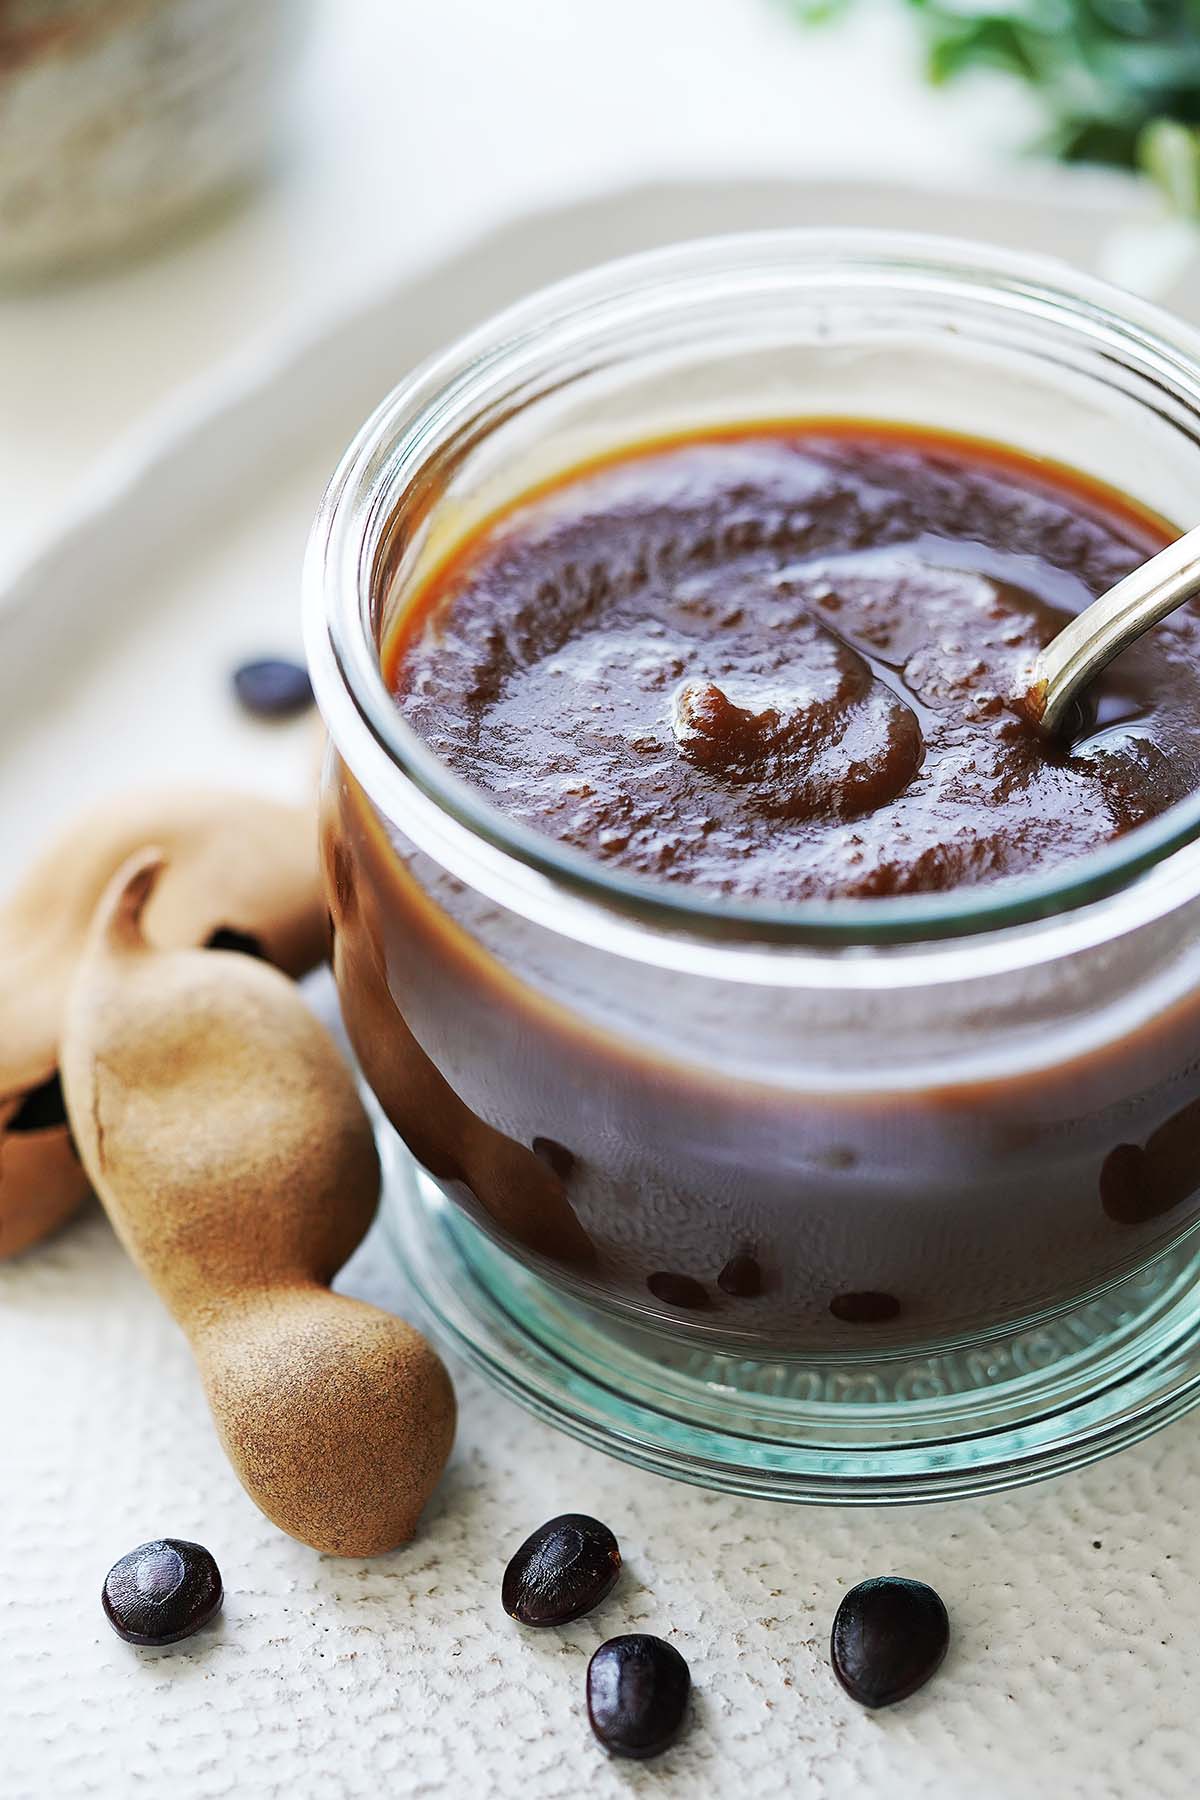 Tamarindo Paste in a small glass jar and whole tamarind pods on the side.